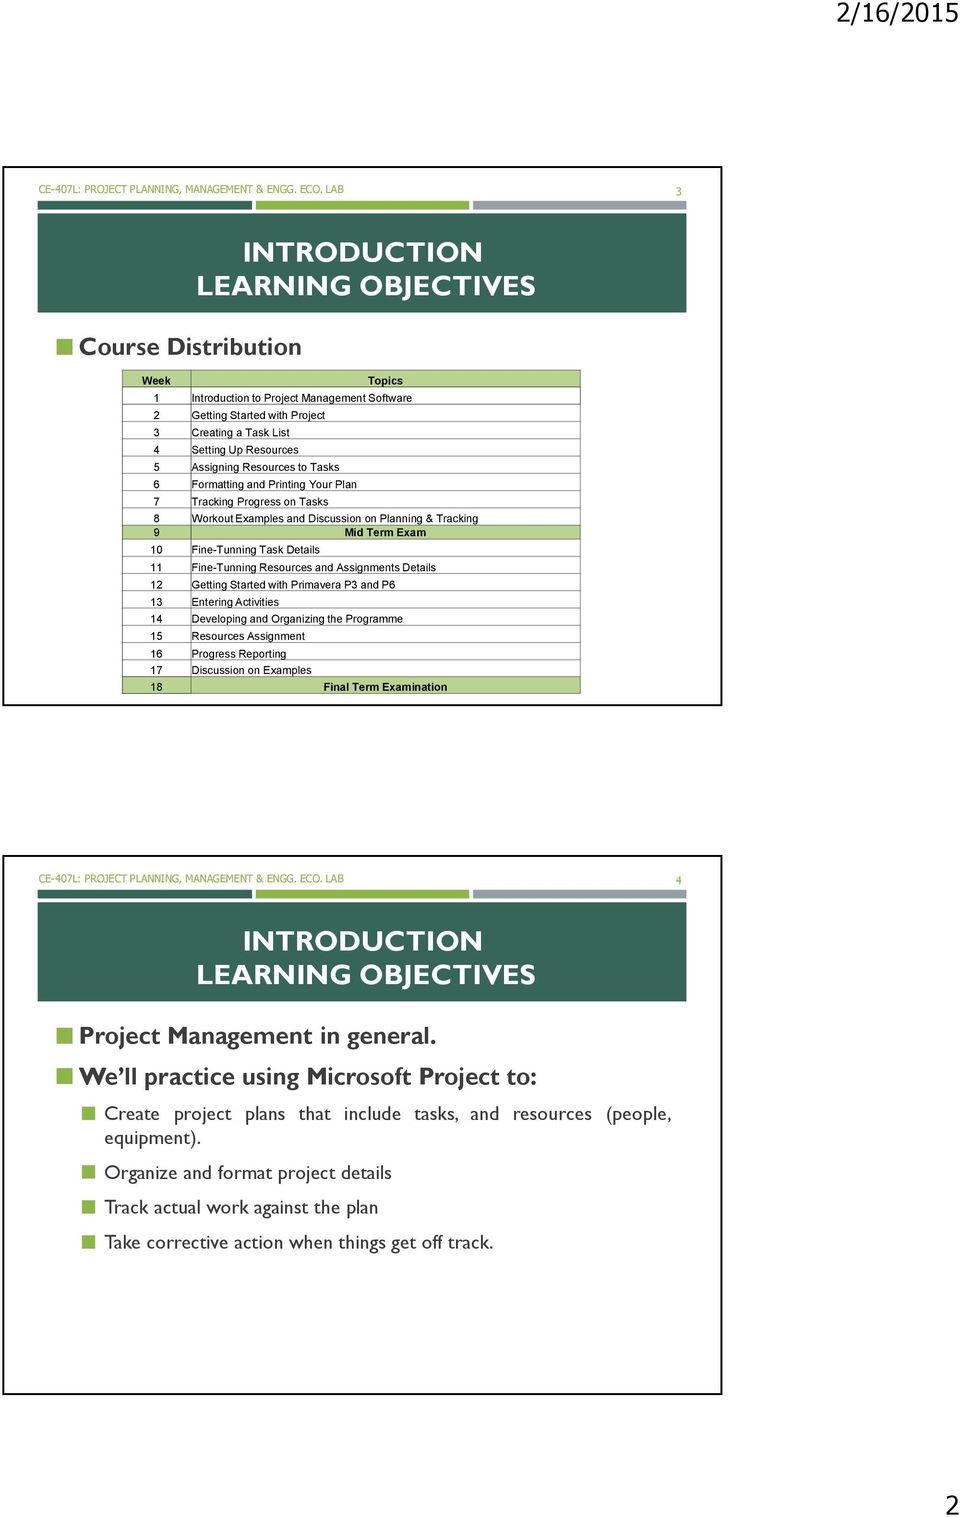 Resources and Assignments Details 12 Getting Started with Primavera P3 and P6 13 Entering Activities 14 Developing and Organizing the Programme 15 Resources Assignment 16 Progress Reporting 17